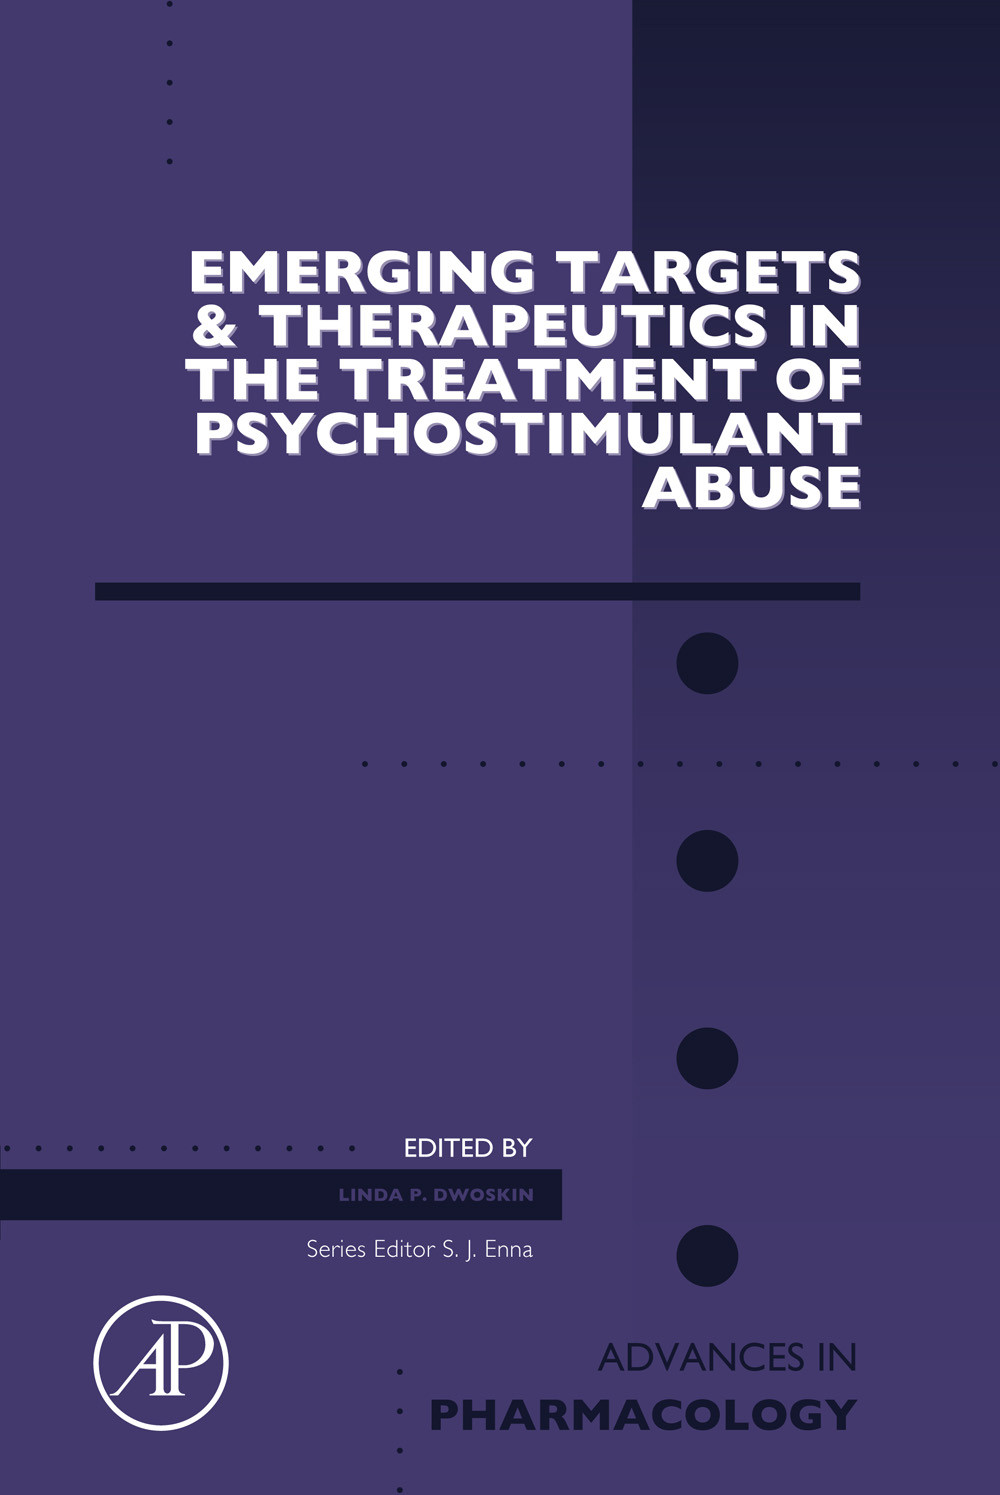 Emerging Targets & Therapeutics in the Treatment of Psychostimulant Abuse